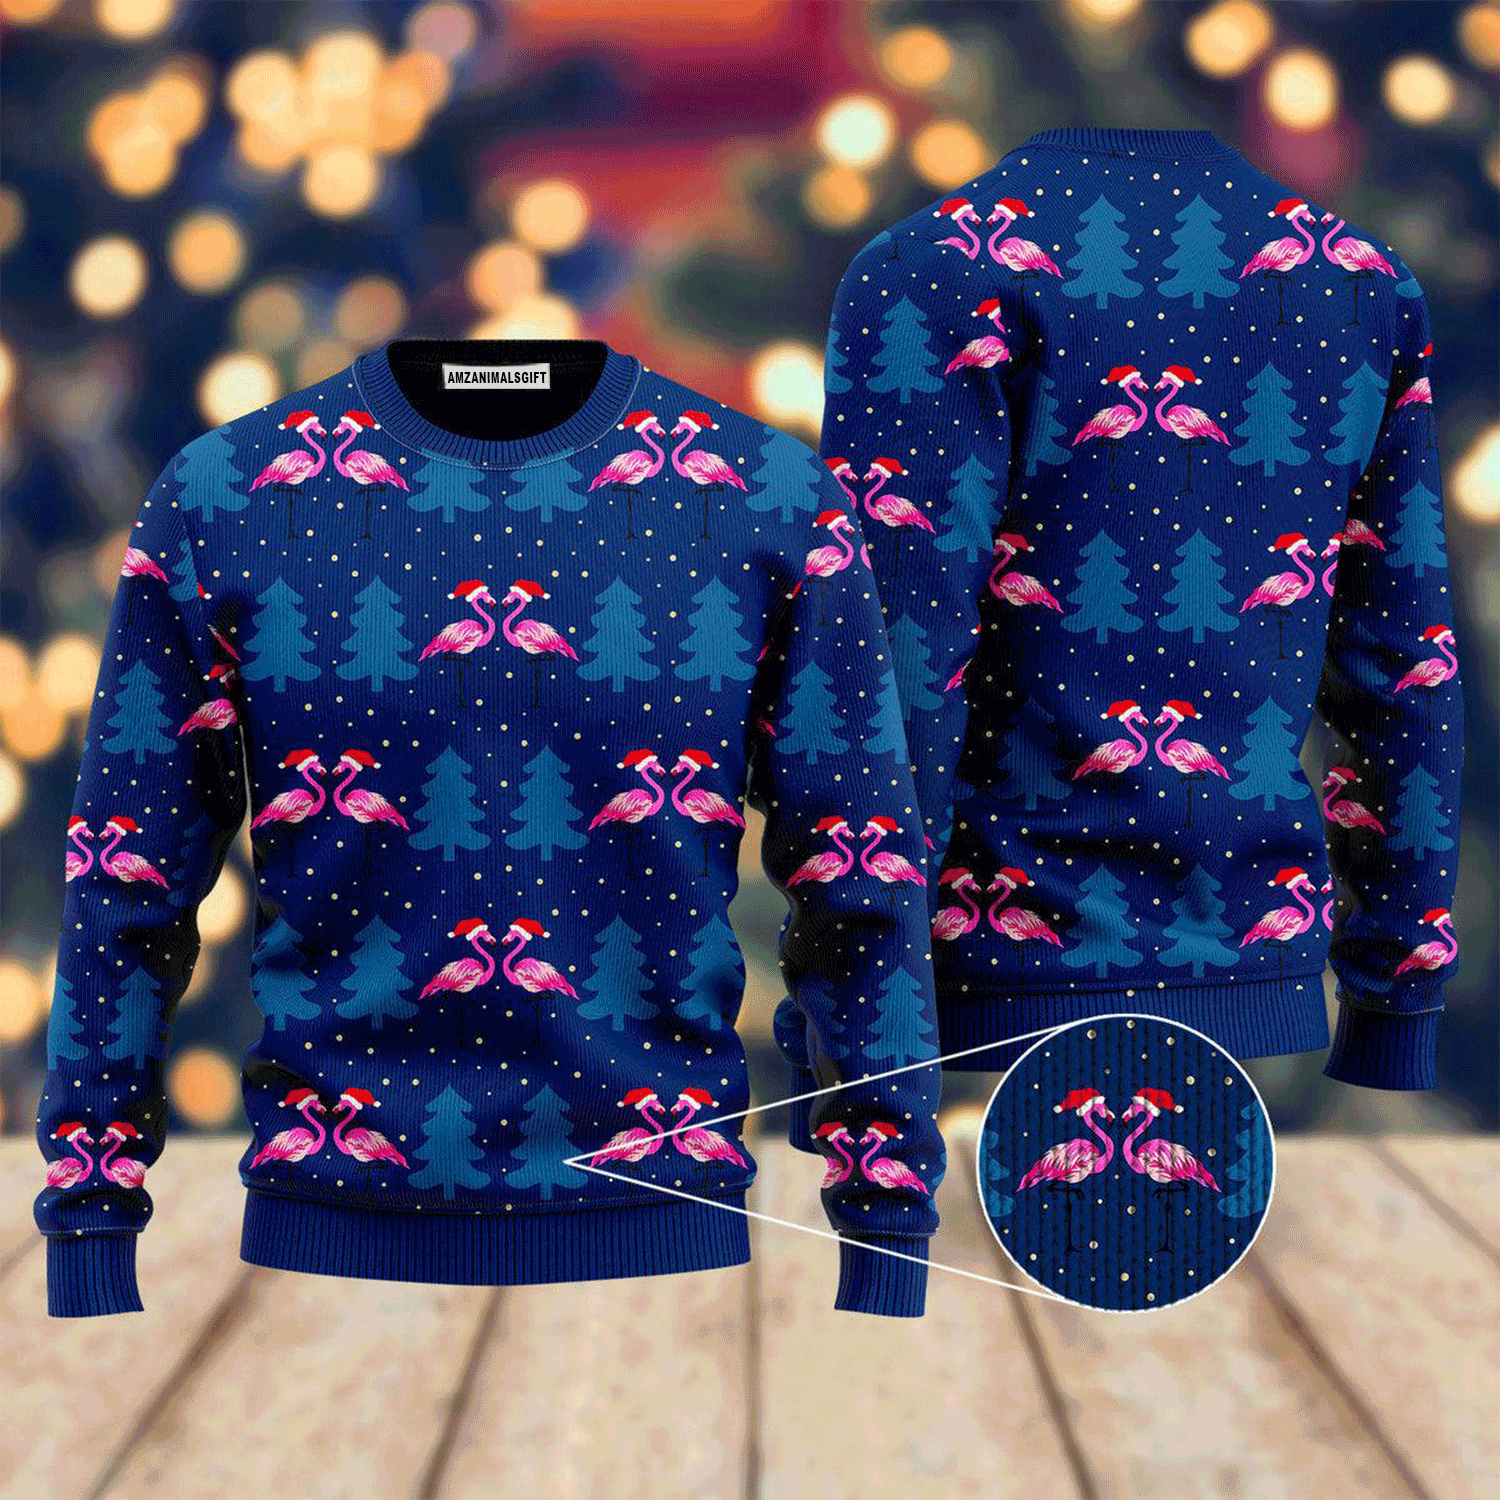 Flocking Around The Christmas Tree Flamingo Sweater, Ugly Sweater For Men & Women, Perfect Outfit For Christmas New Year Autumn Winter